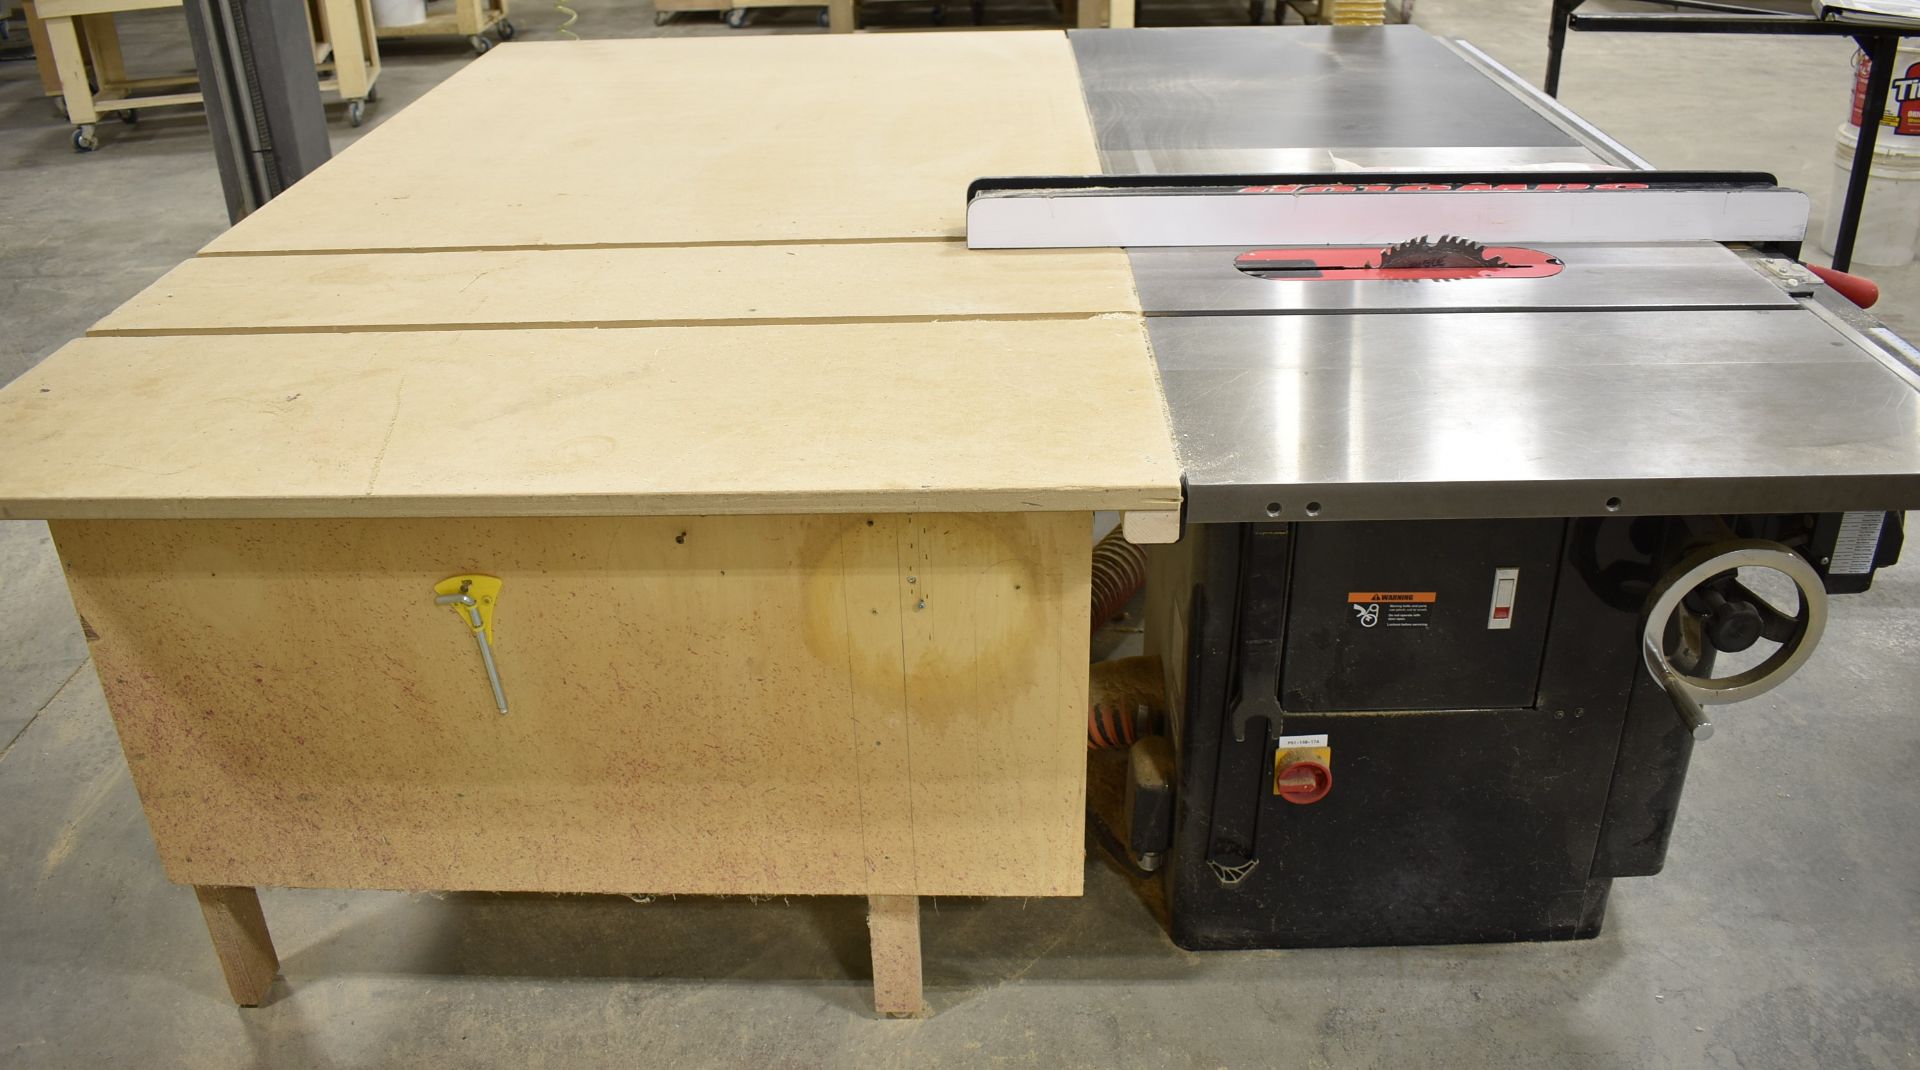 SAWSTOP ICS31230 10" INDUSTRIAL CABINET SAW WITH 3 HP MOTOR, SPEEDS TO 4,000 RPM, S/N I170300103 ( - Image 6 of 6